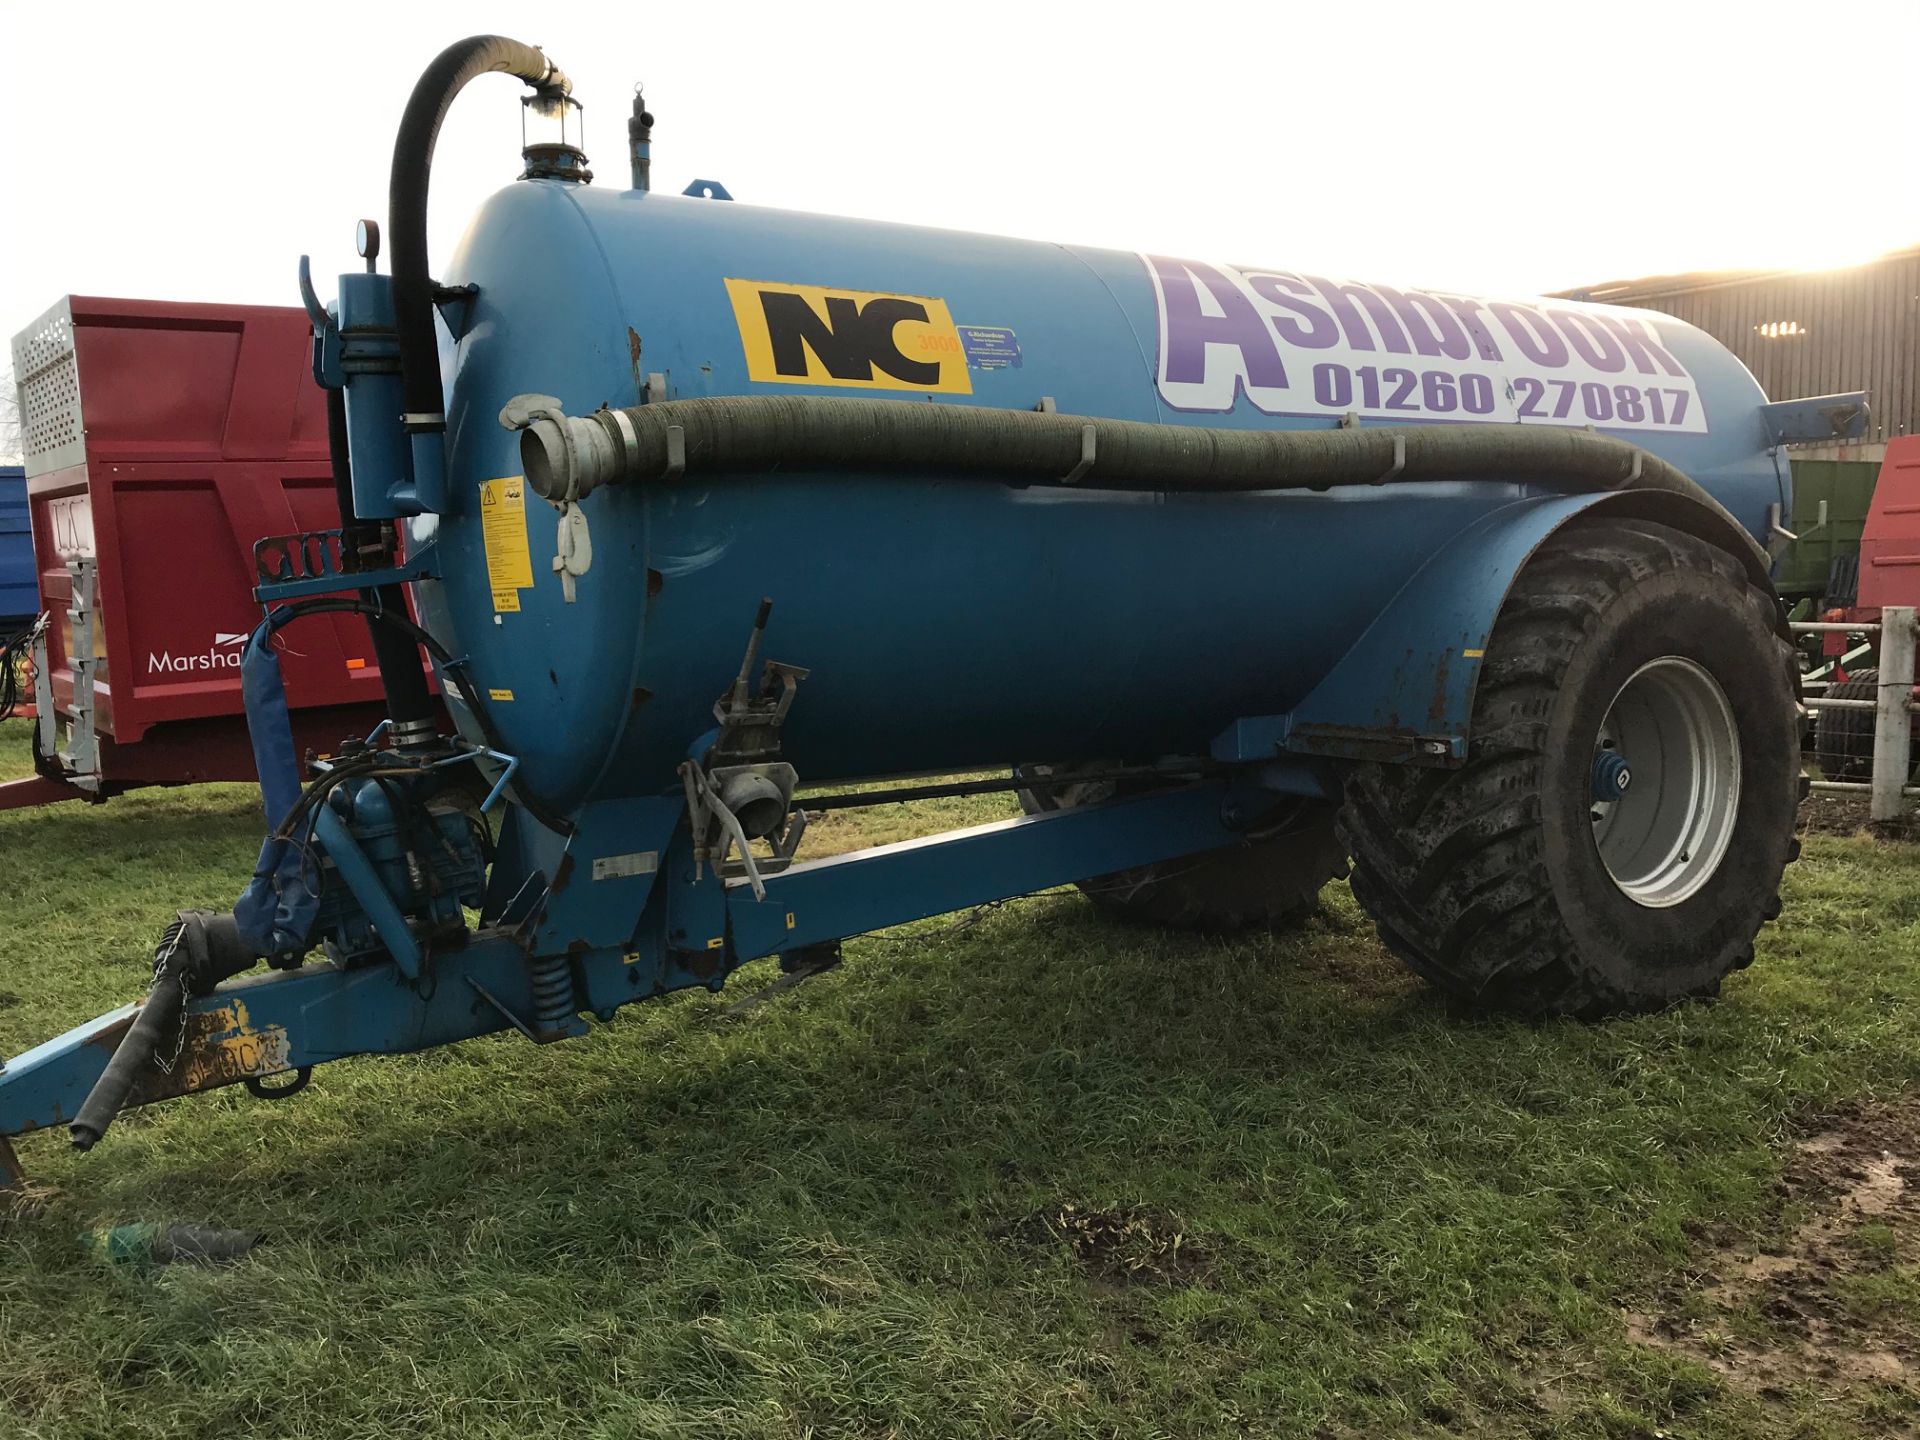 2014 NC 3000 Gallon Tanker, Sprung Drawbar, 4 Outlets, Alliance 800/65 R32 Tyres - Image 4 of 6